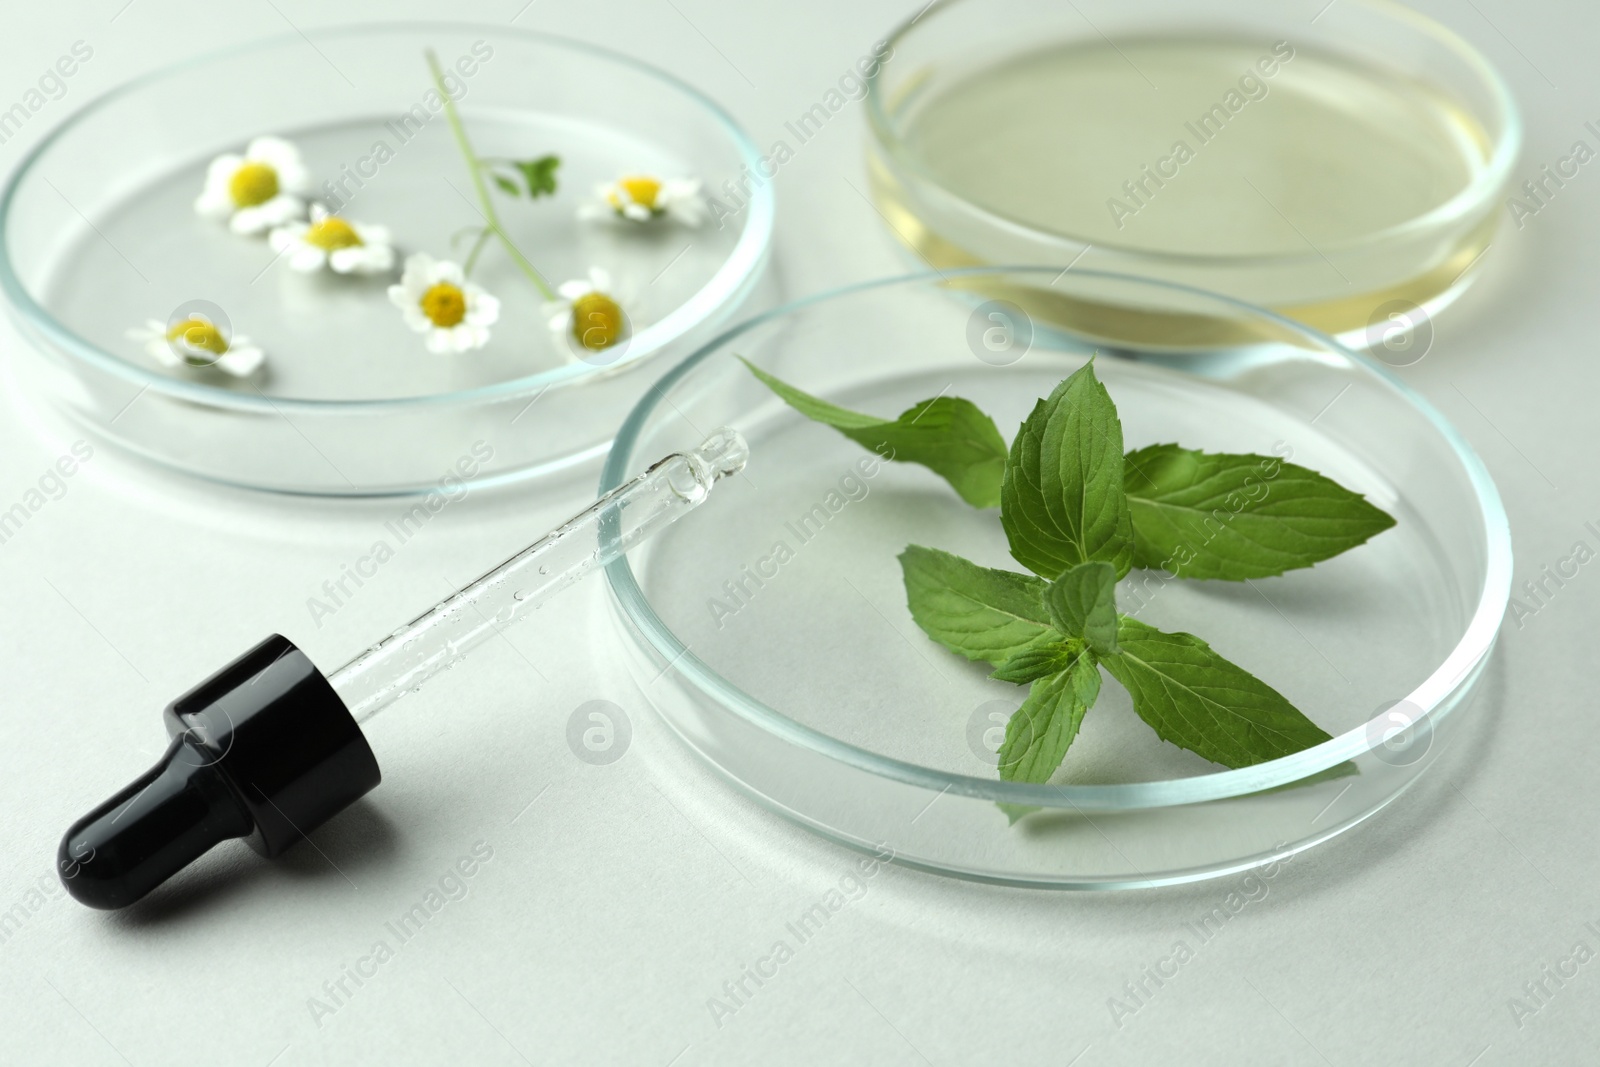 Photo of Petri dishes and plants on light grey background